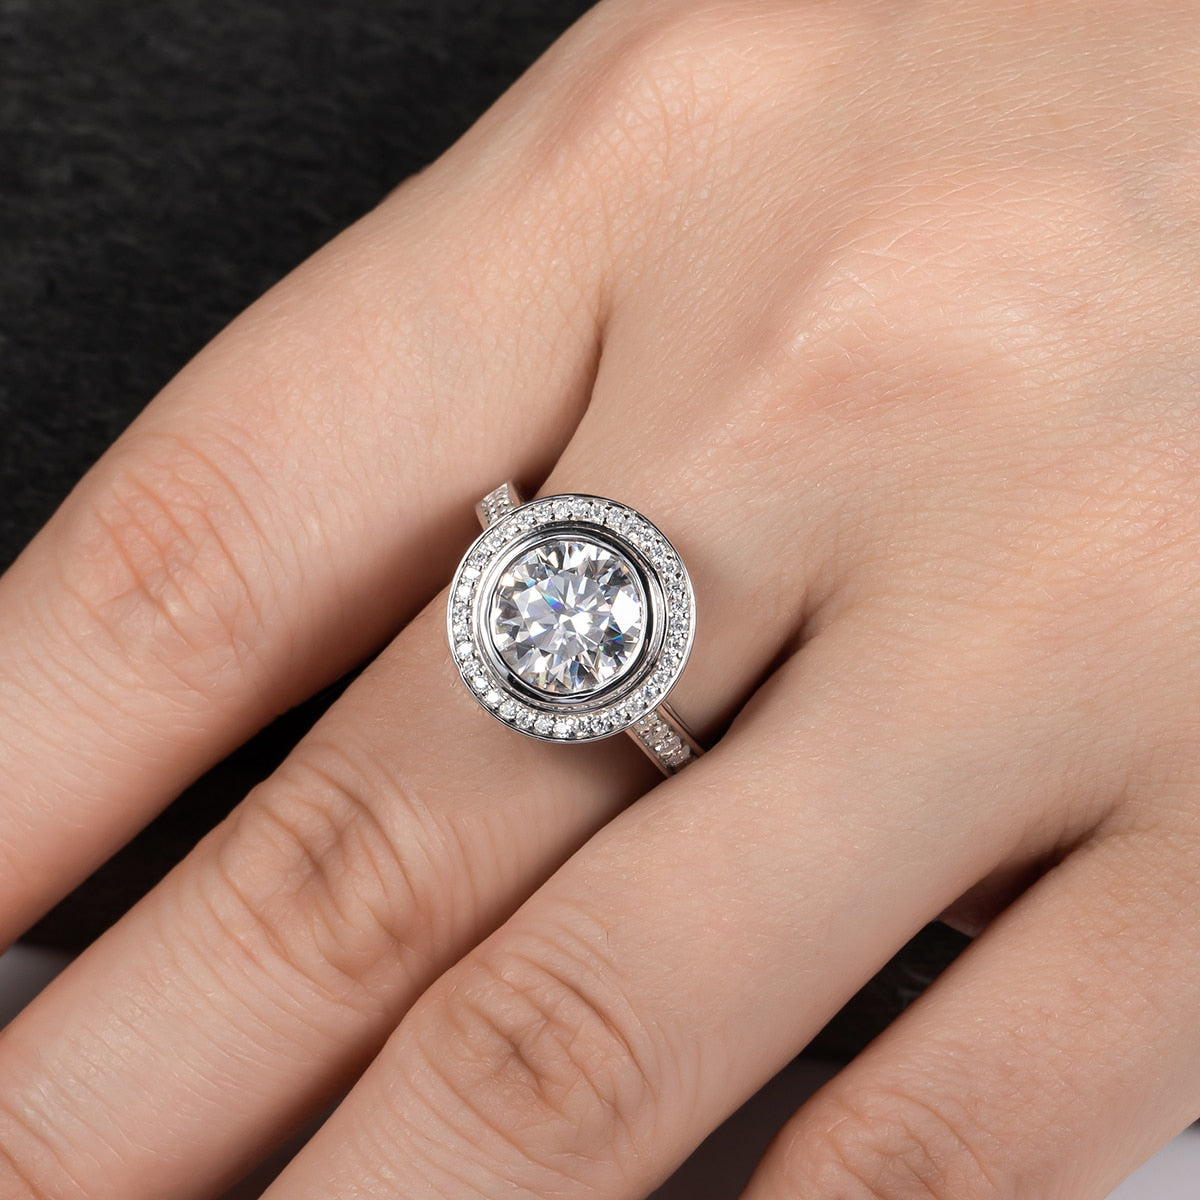 A vintage style ring with 3CT moissanite bezel set surrounded with a halo and pave band worn on a hand.